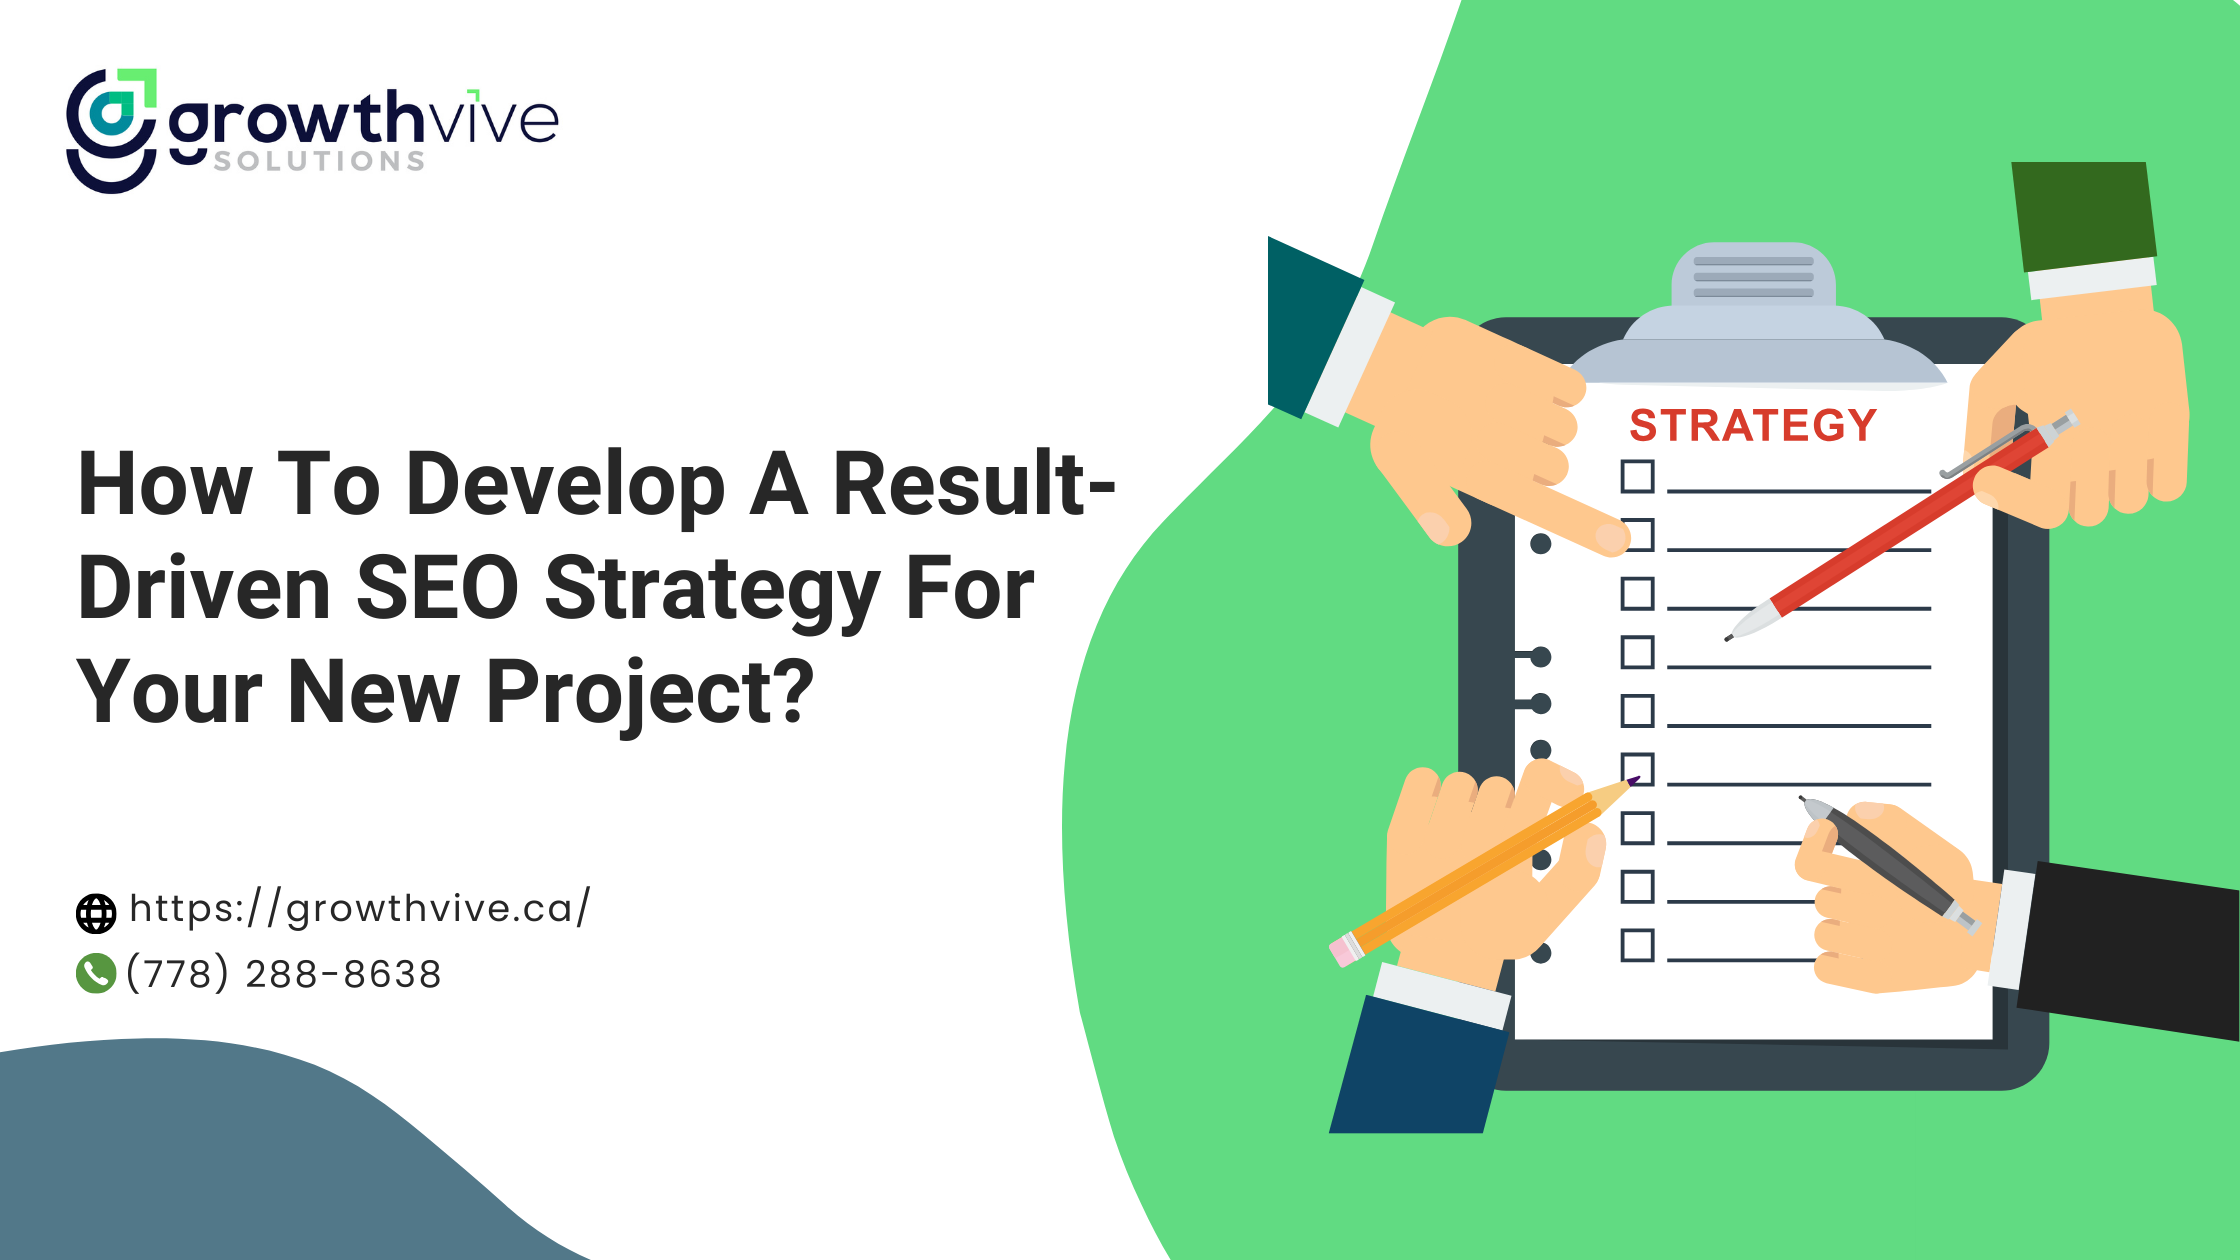 How To Develop A Result-Driven SEO Strategy For Your New Project?